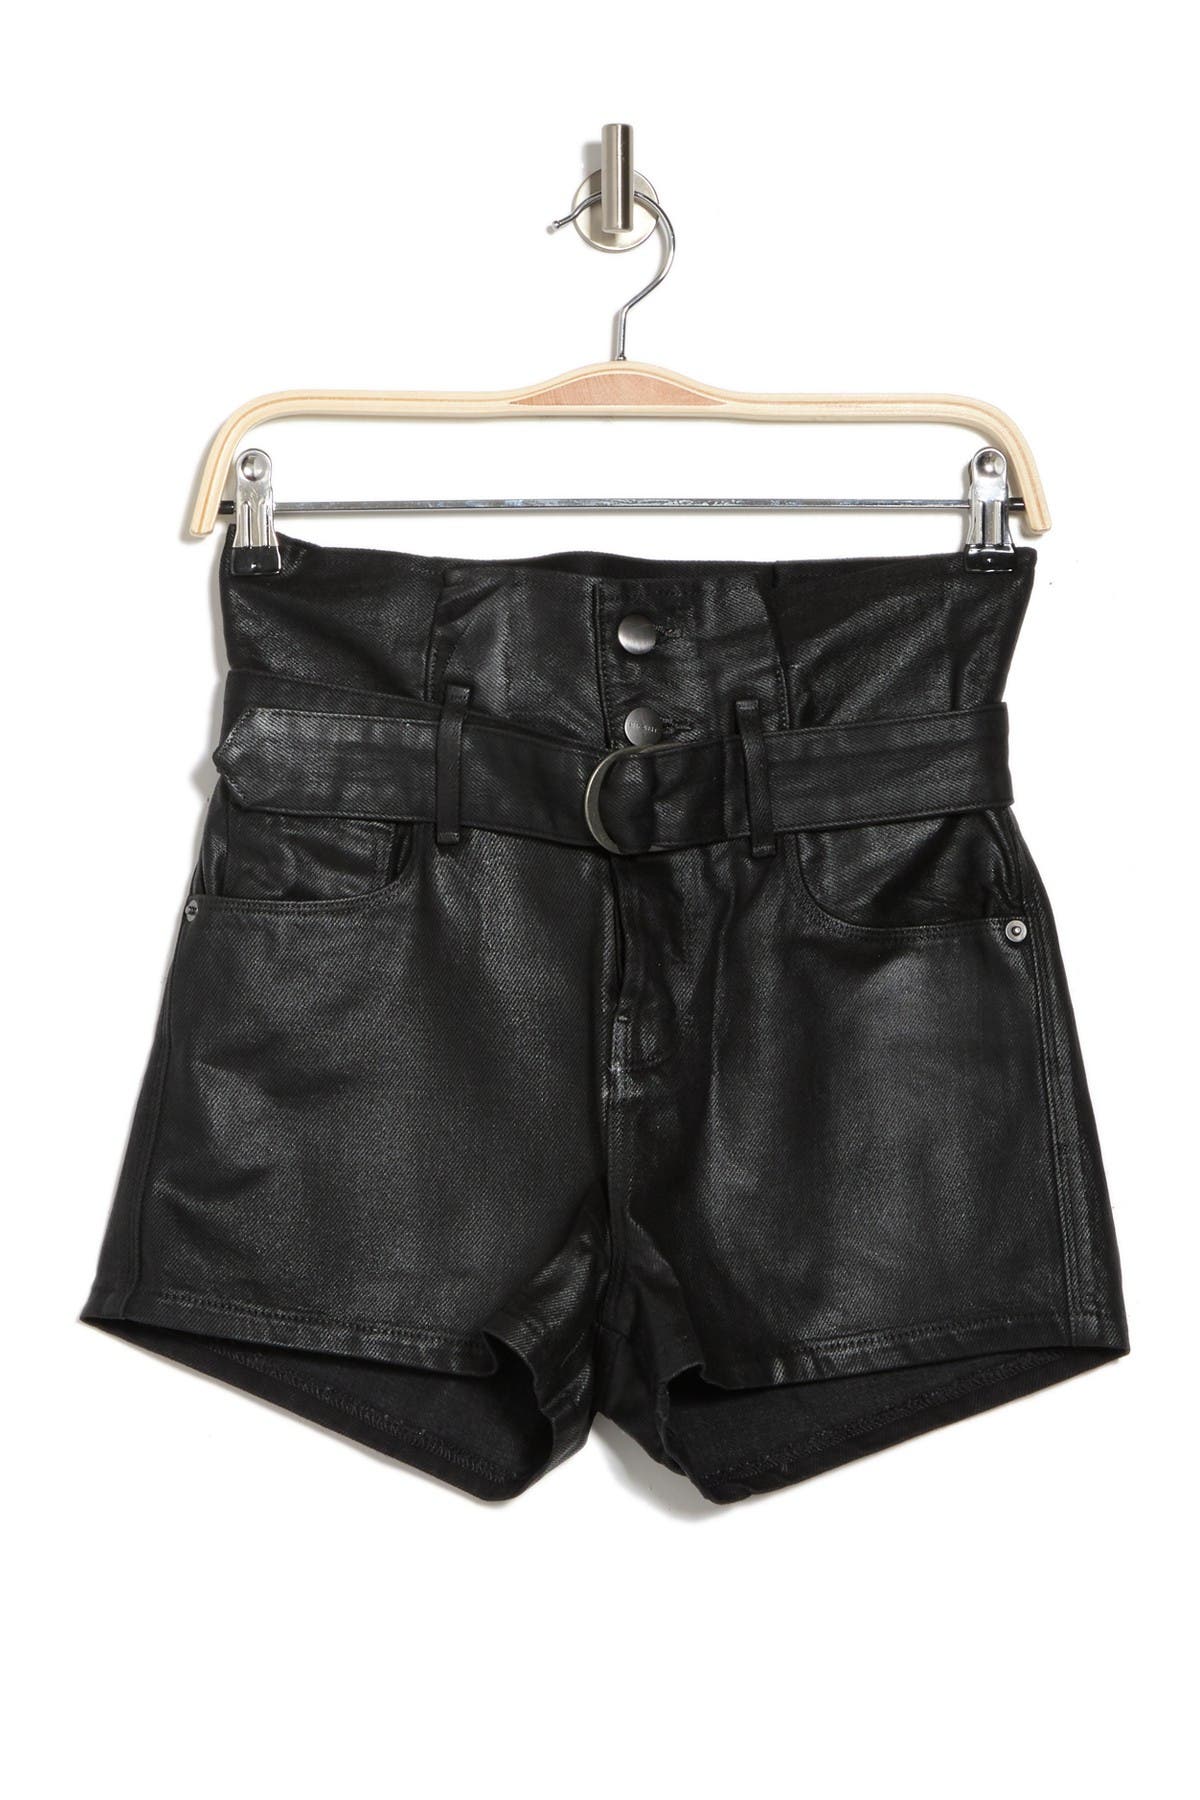 Frame Le Bootie Coated Shorts In Noir Coate